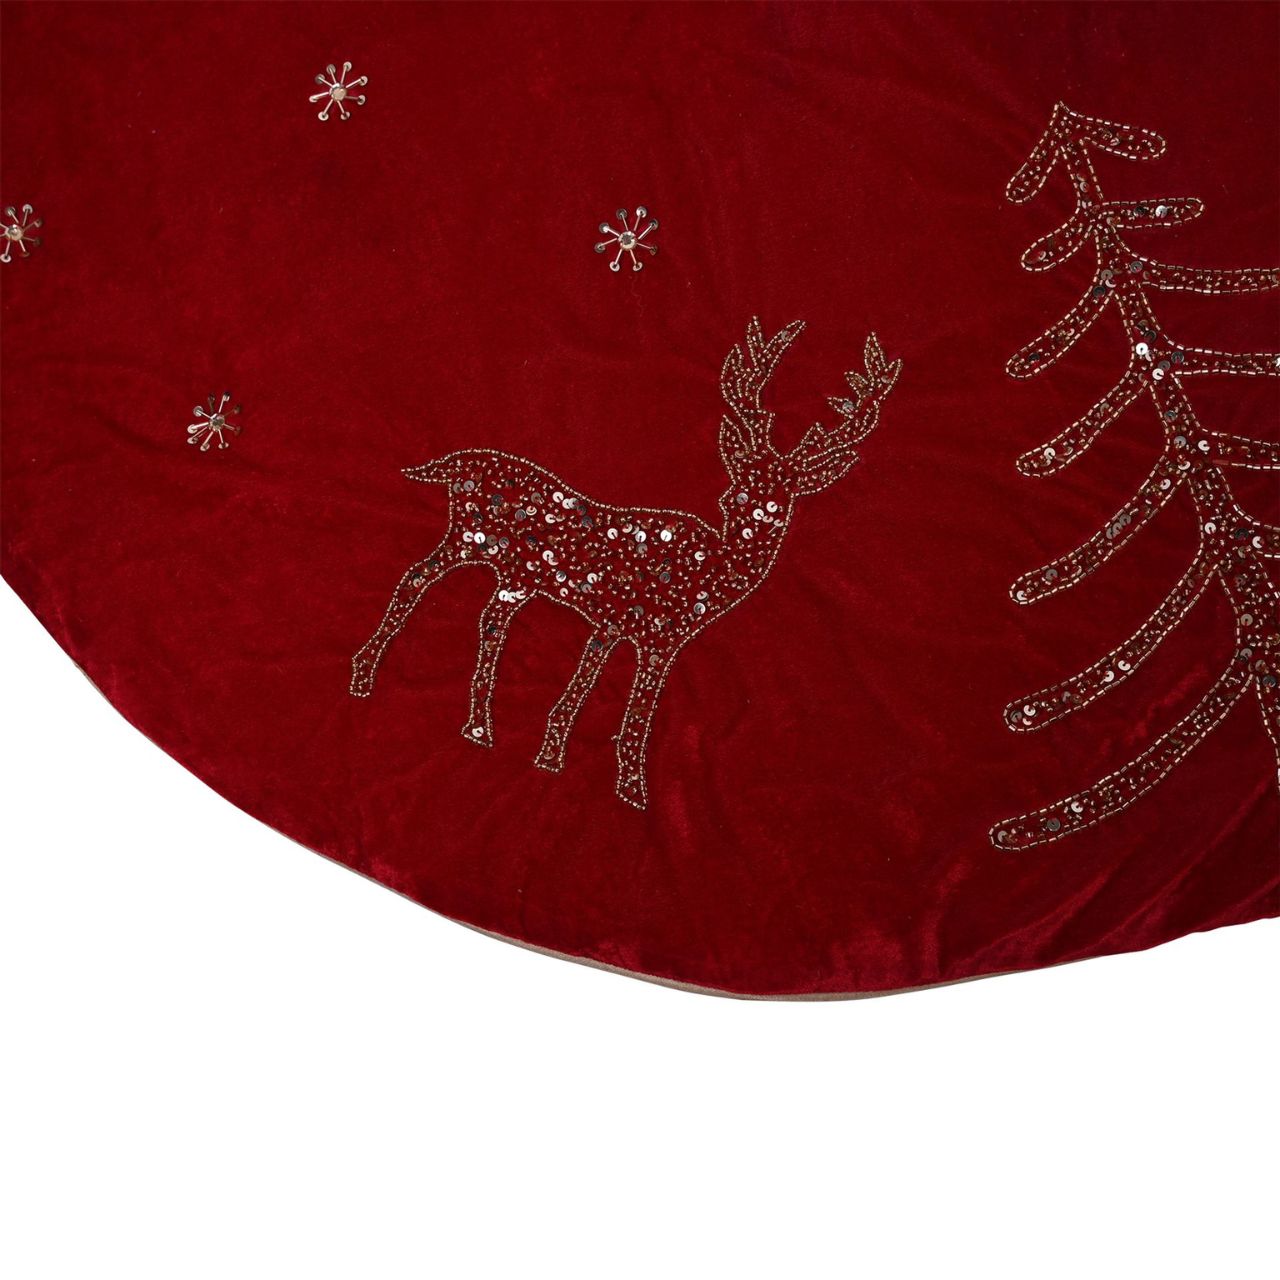 Hand Embellished Luxury Red Christmas Tree Skirt  A hand embellished luxury red tree skirt.  This standout accessory wraps itself around Christmas trees to accentuate its decoration.